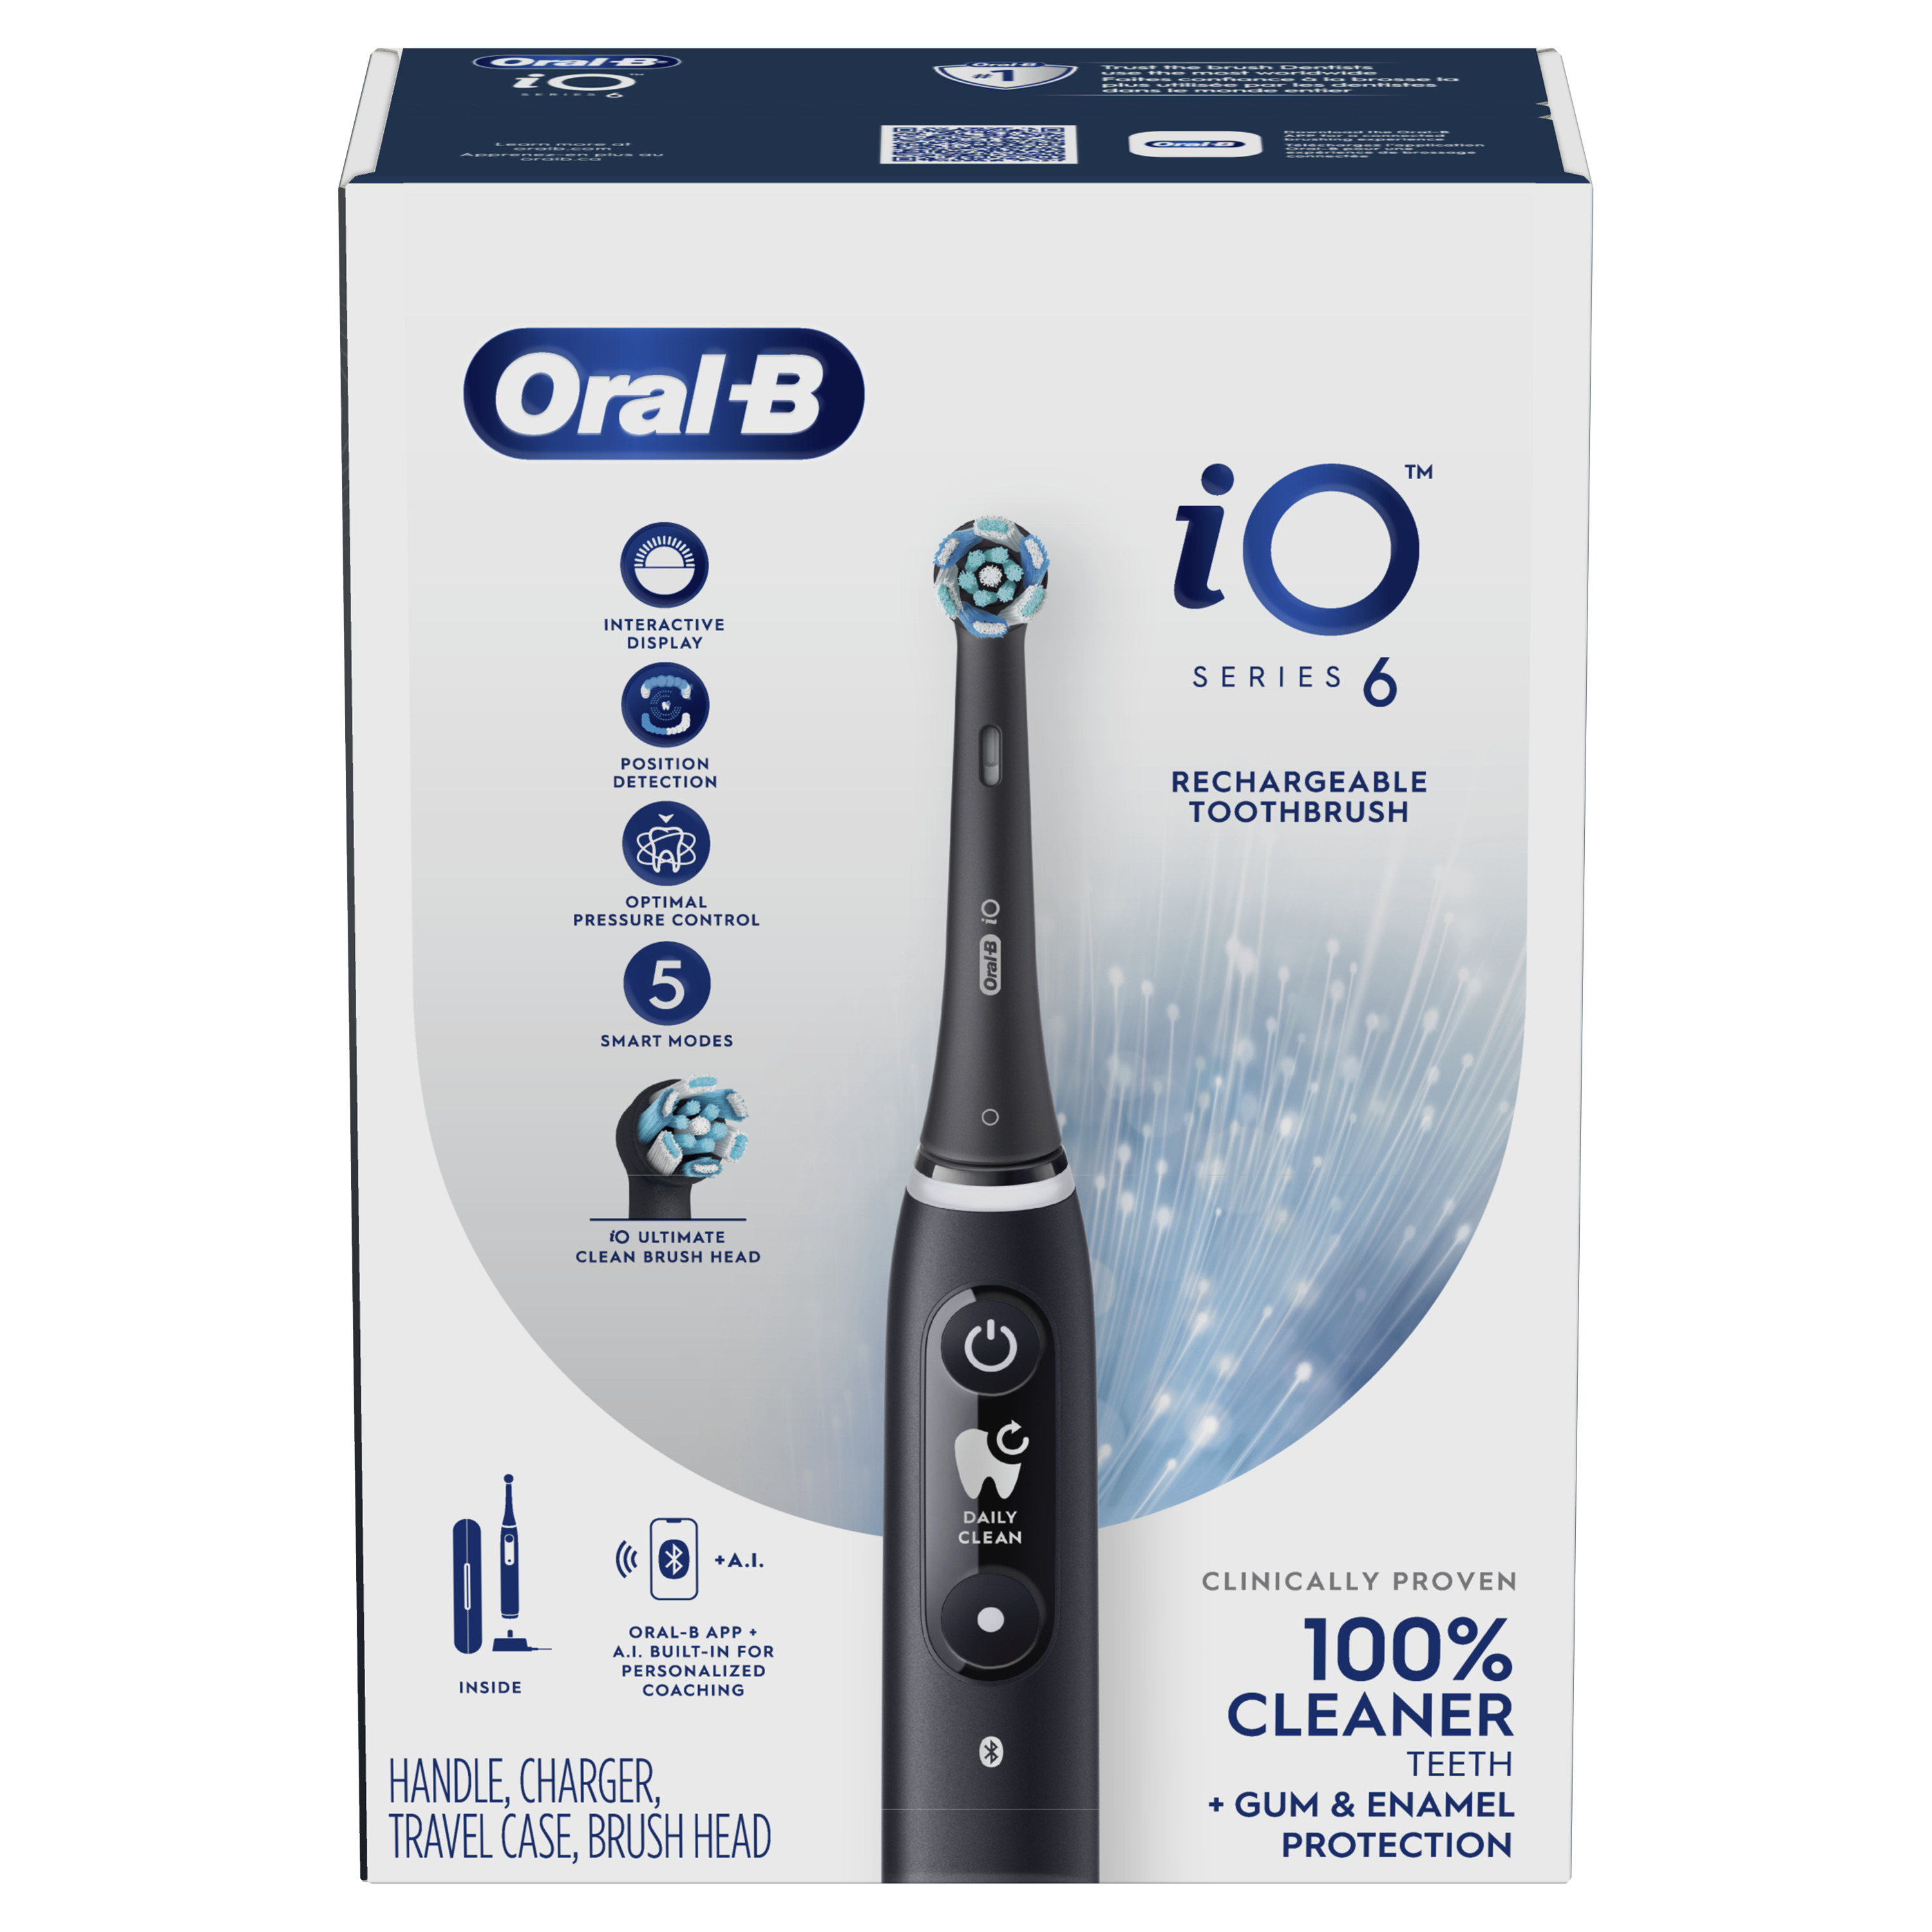 Oral-B iO Series 6 Electric Toothbrush with (1) Brush Head, Black Lava, for Adults & Children 3+ - image 2 of 11